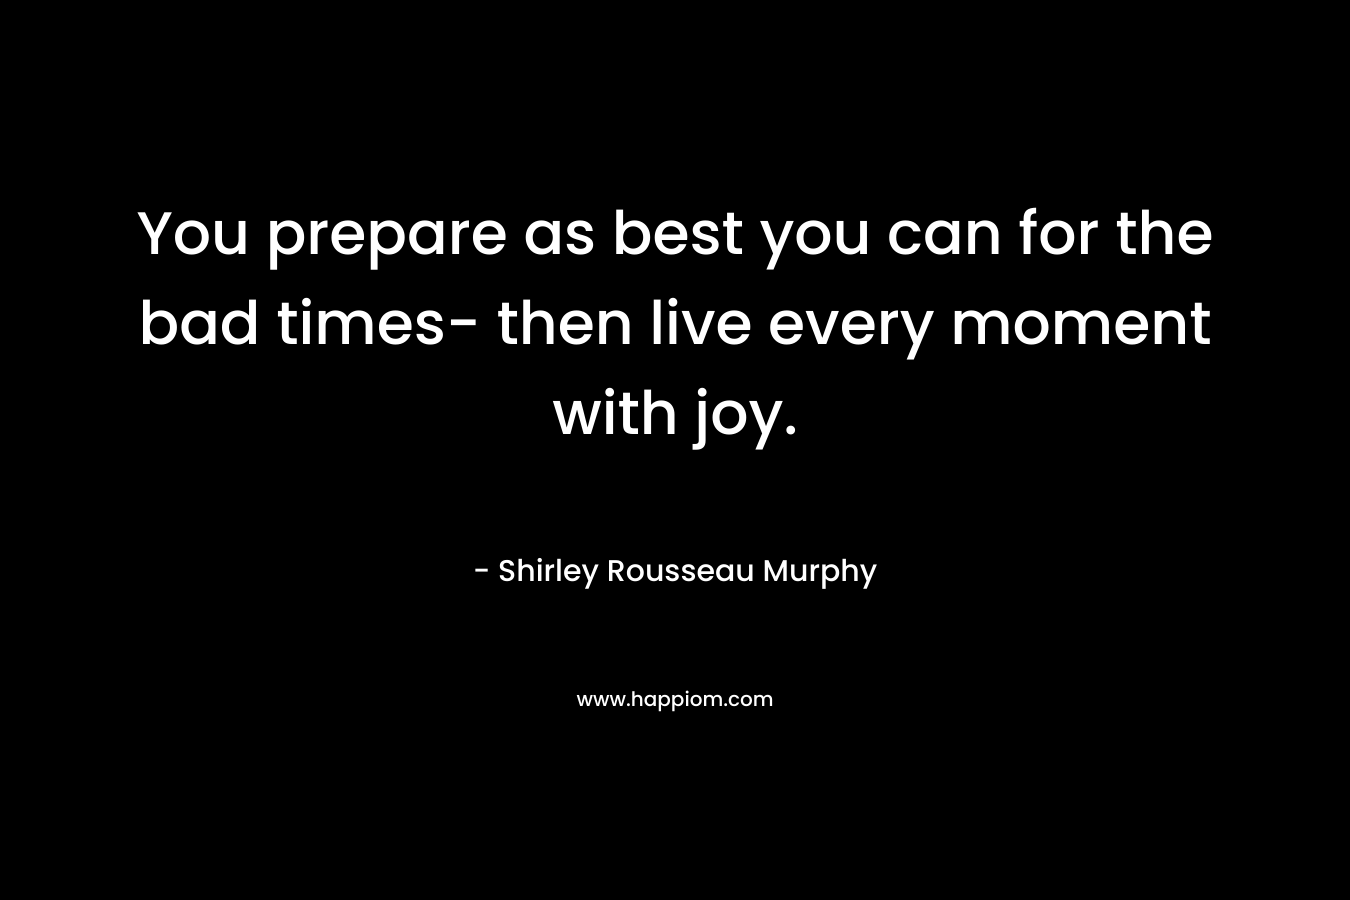 You prepare as best you can for the bad times- then live every moment with joy.